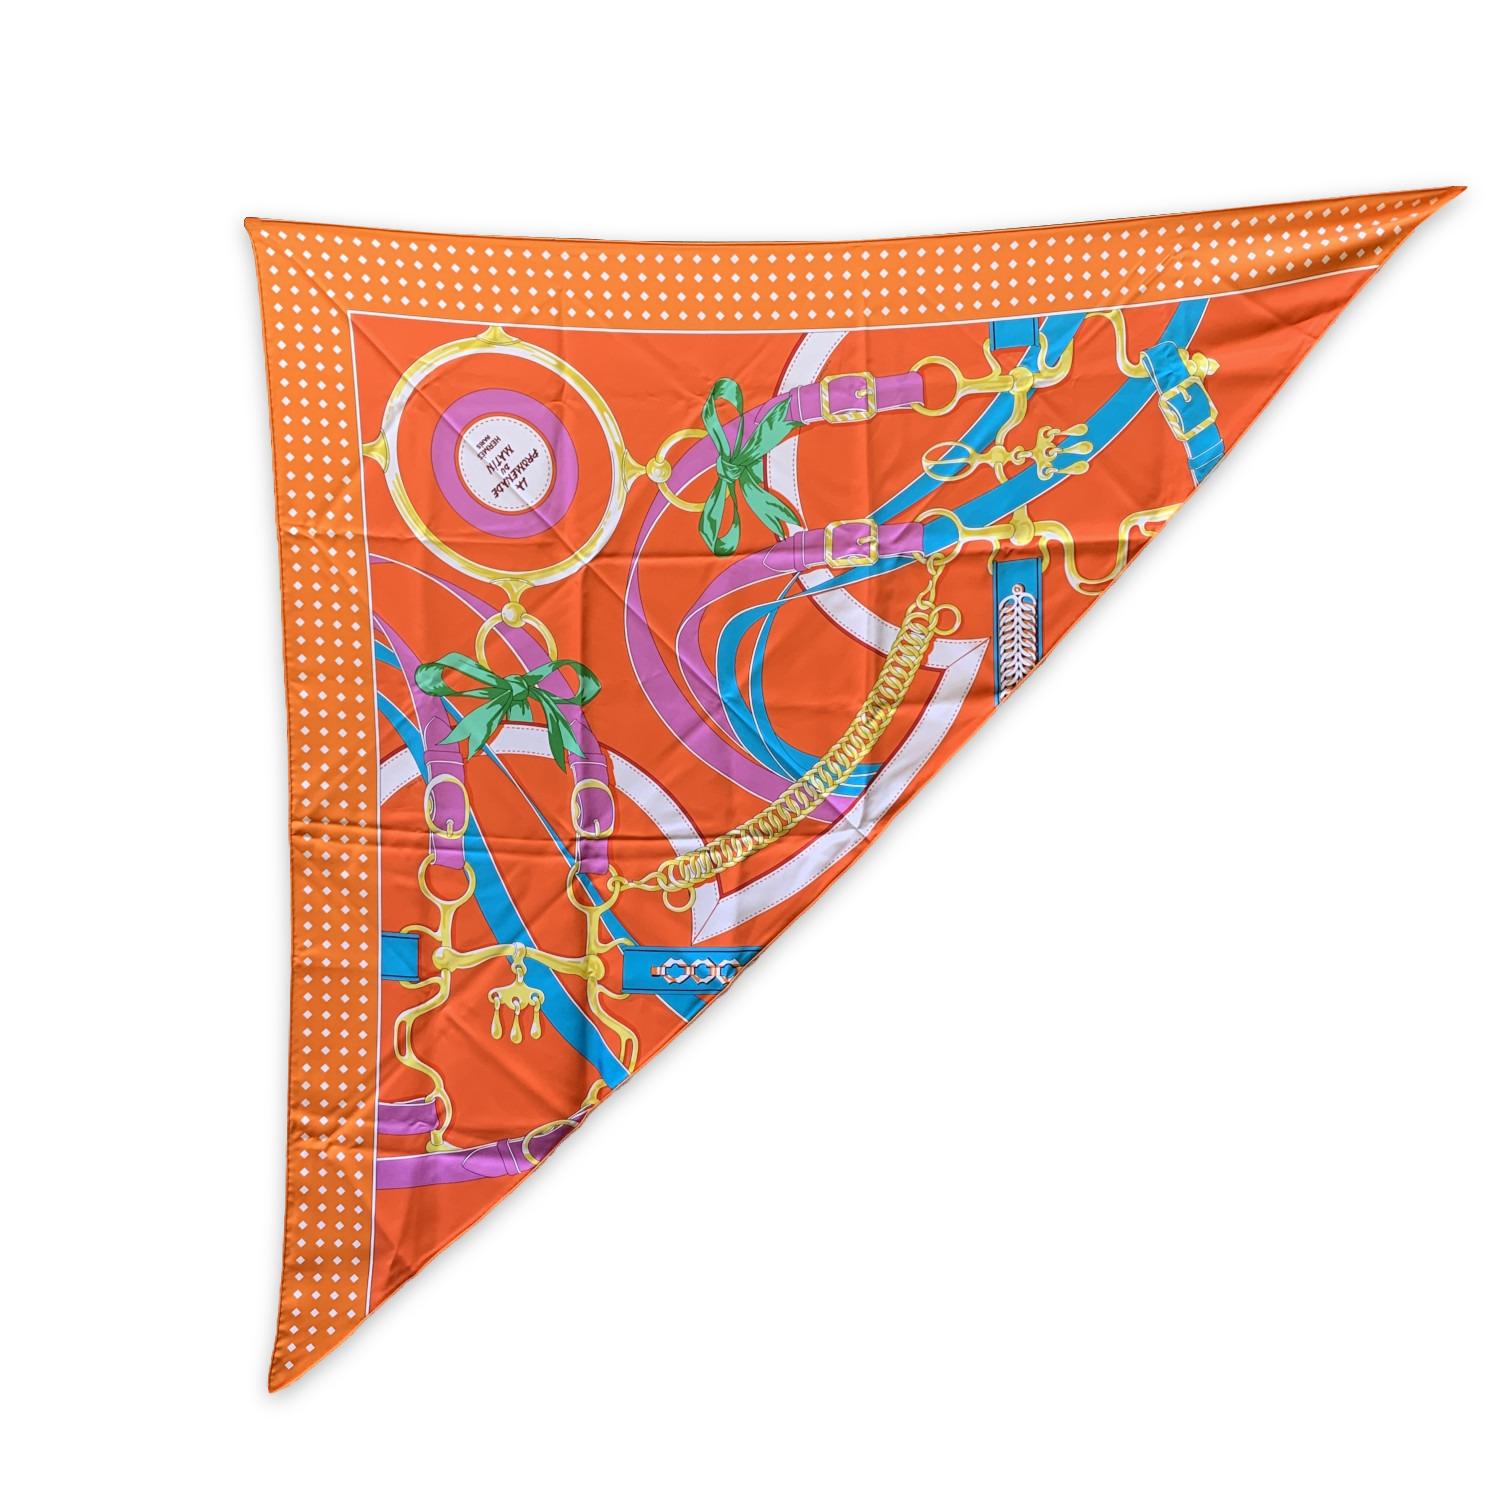 HERMES Silk Giant Triangle scarf named 'La Promenade du Matin', designed by famed artist Henri d'Origny. The Giant Triangle was launched in early March 2019. Hermes with copyright symbol printed on the scarf. Measurements: 37 x 74 inches - 94 x 188